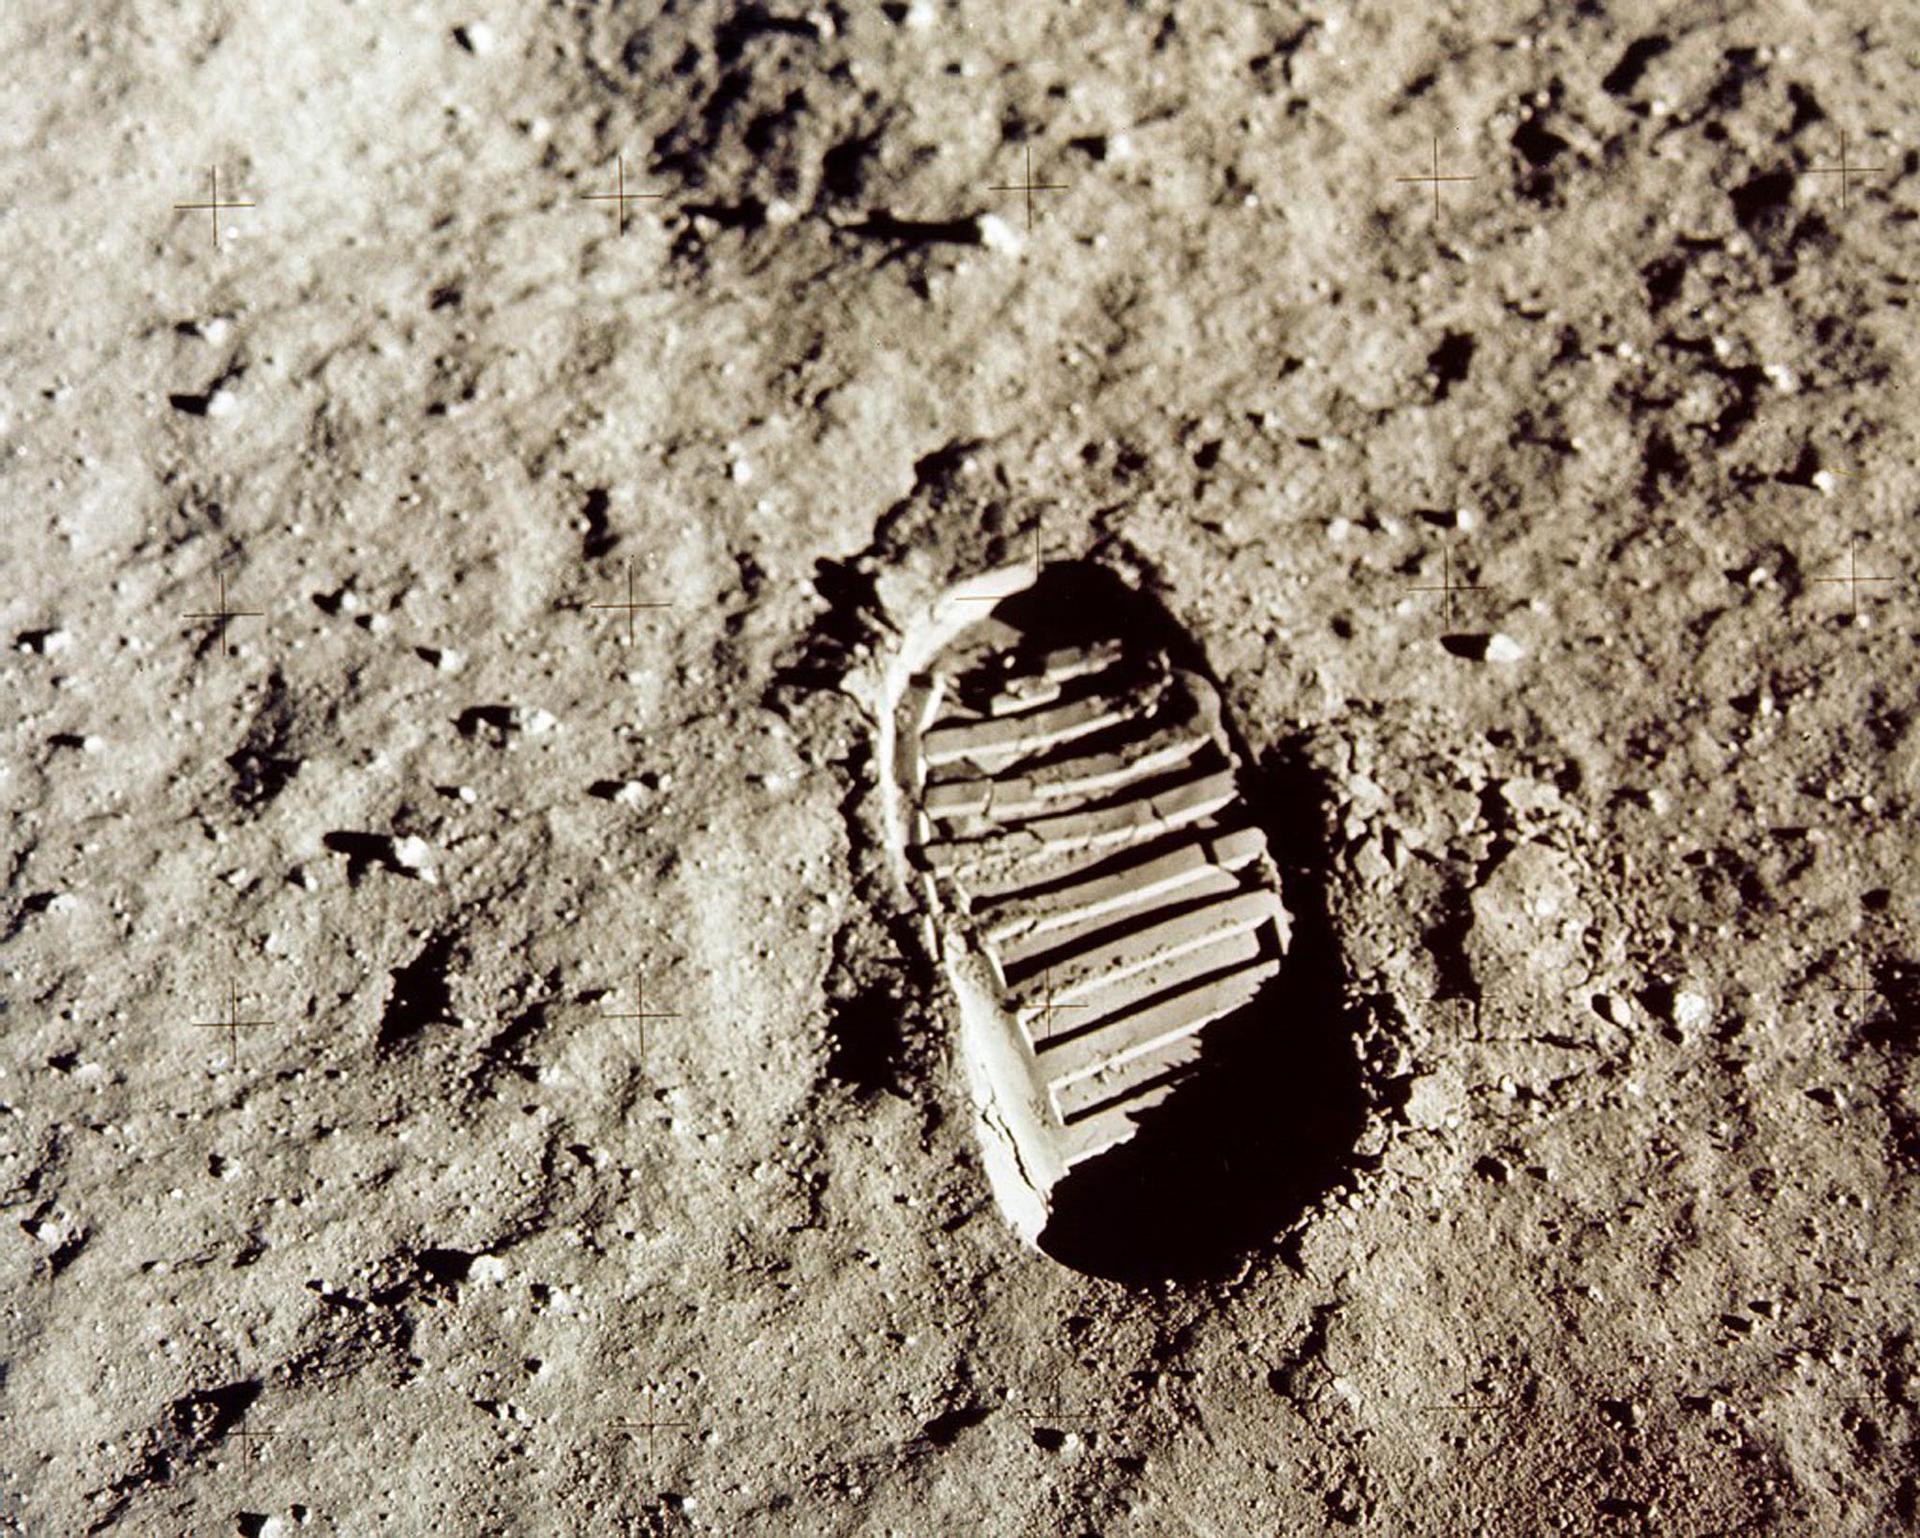 The oval tread of an astronaut's footprint is shown on the the lunar soil.